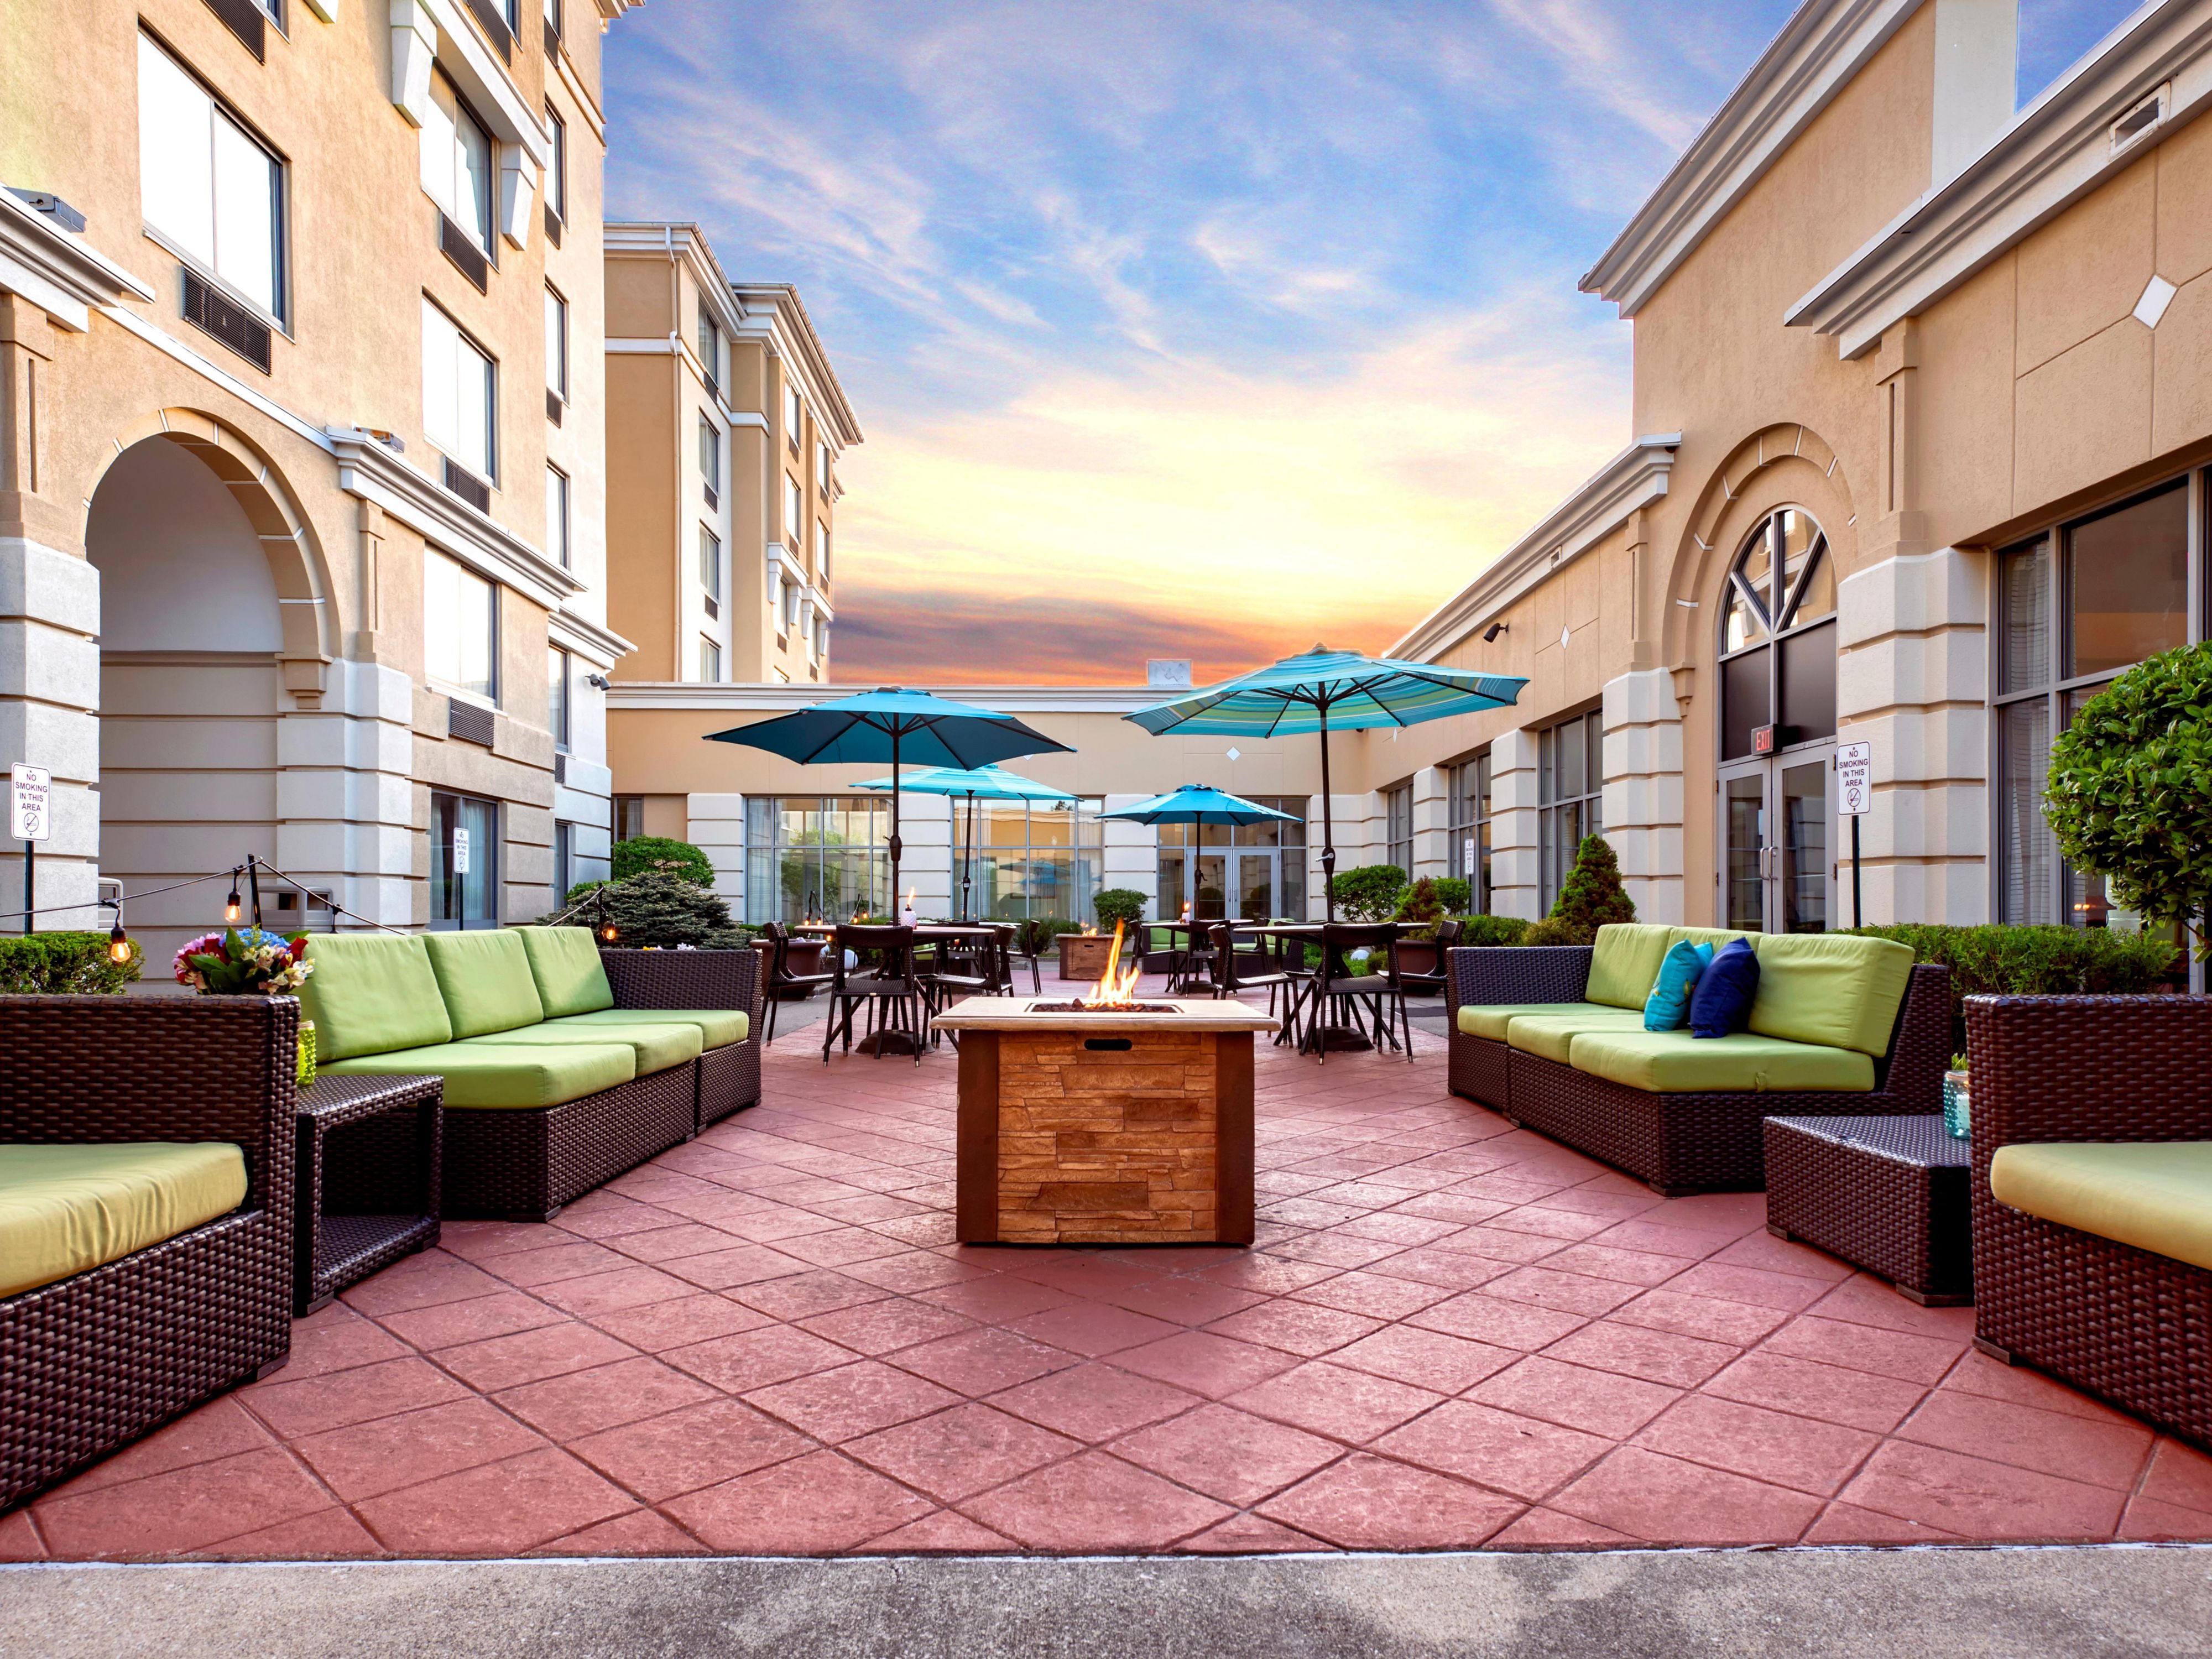 Enjoy our wonderful outdoor courtyard area to meet with friends, family and colleagues during the gorgeous Indiana Summer! 